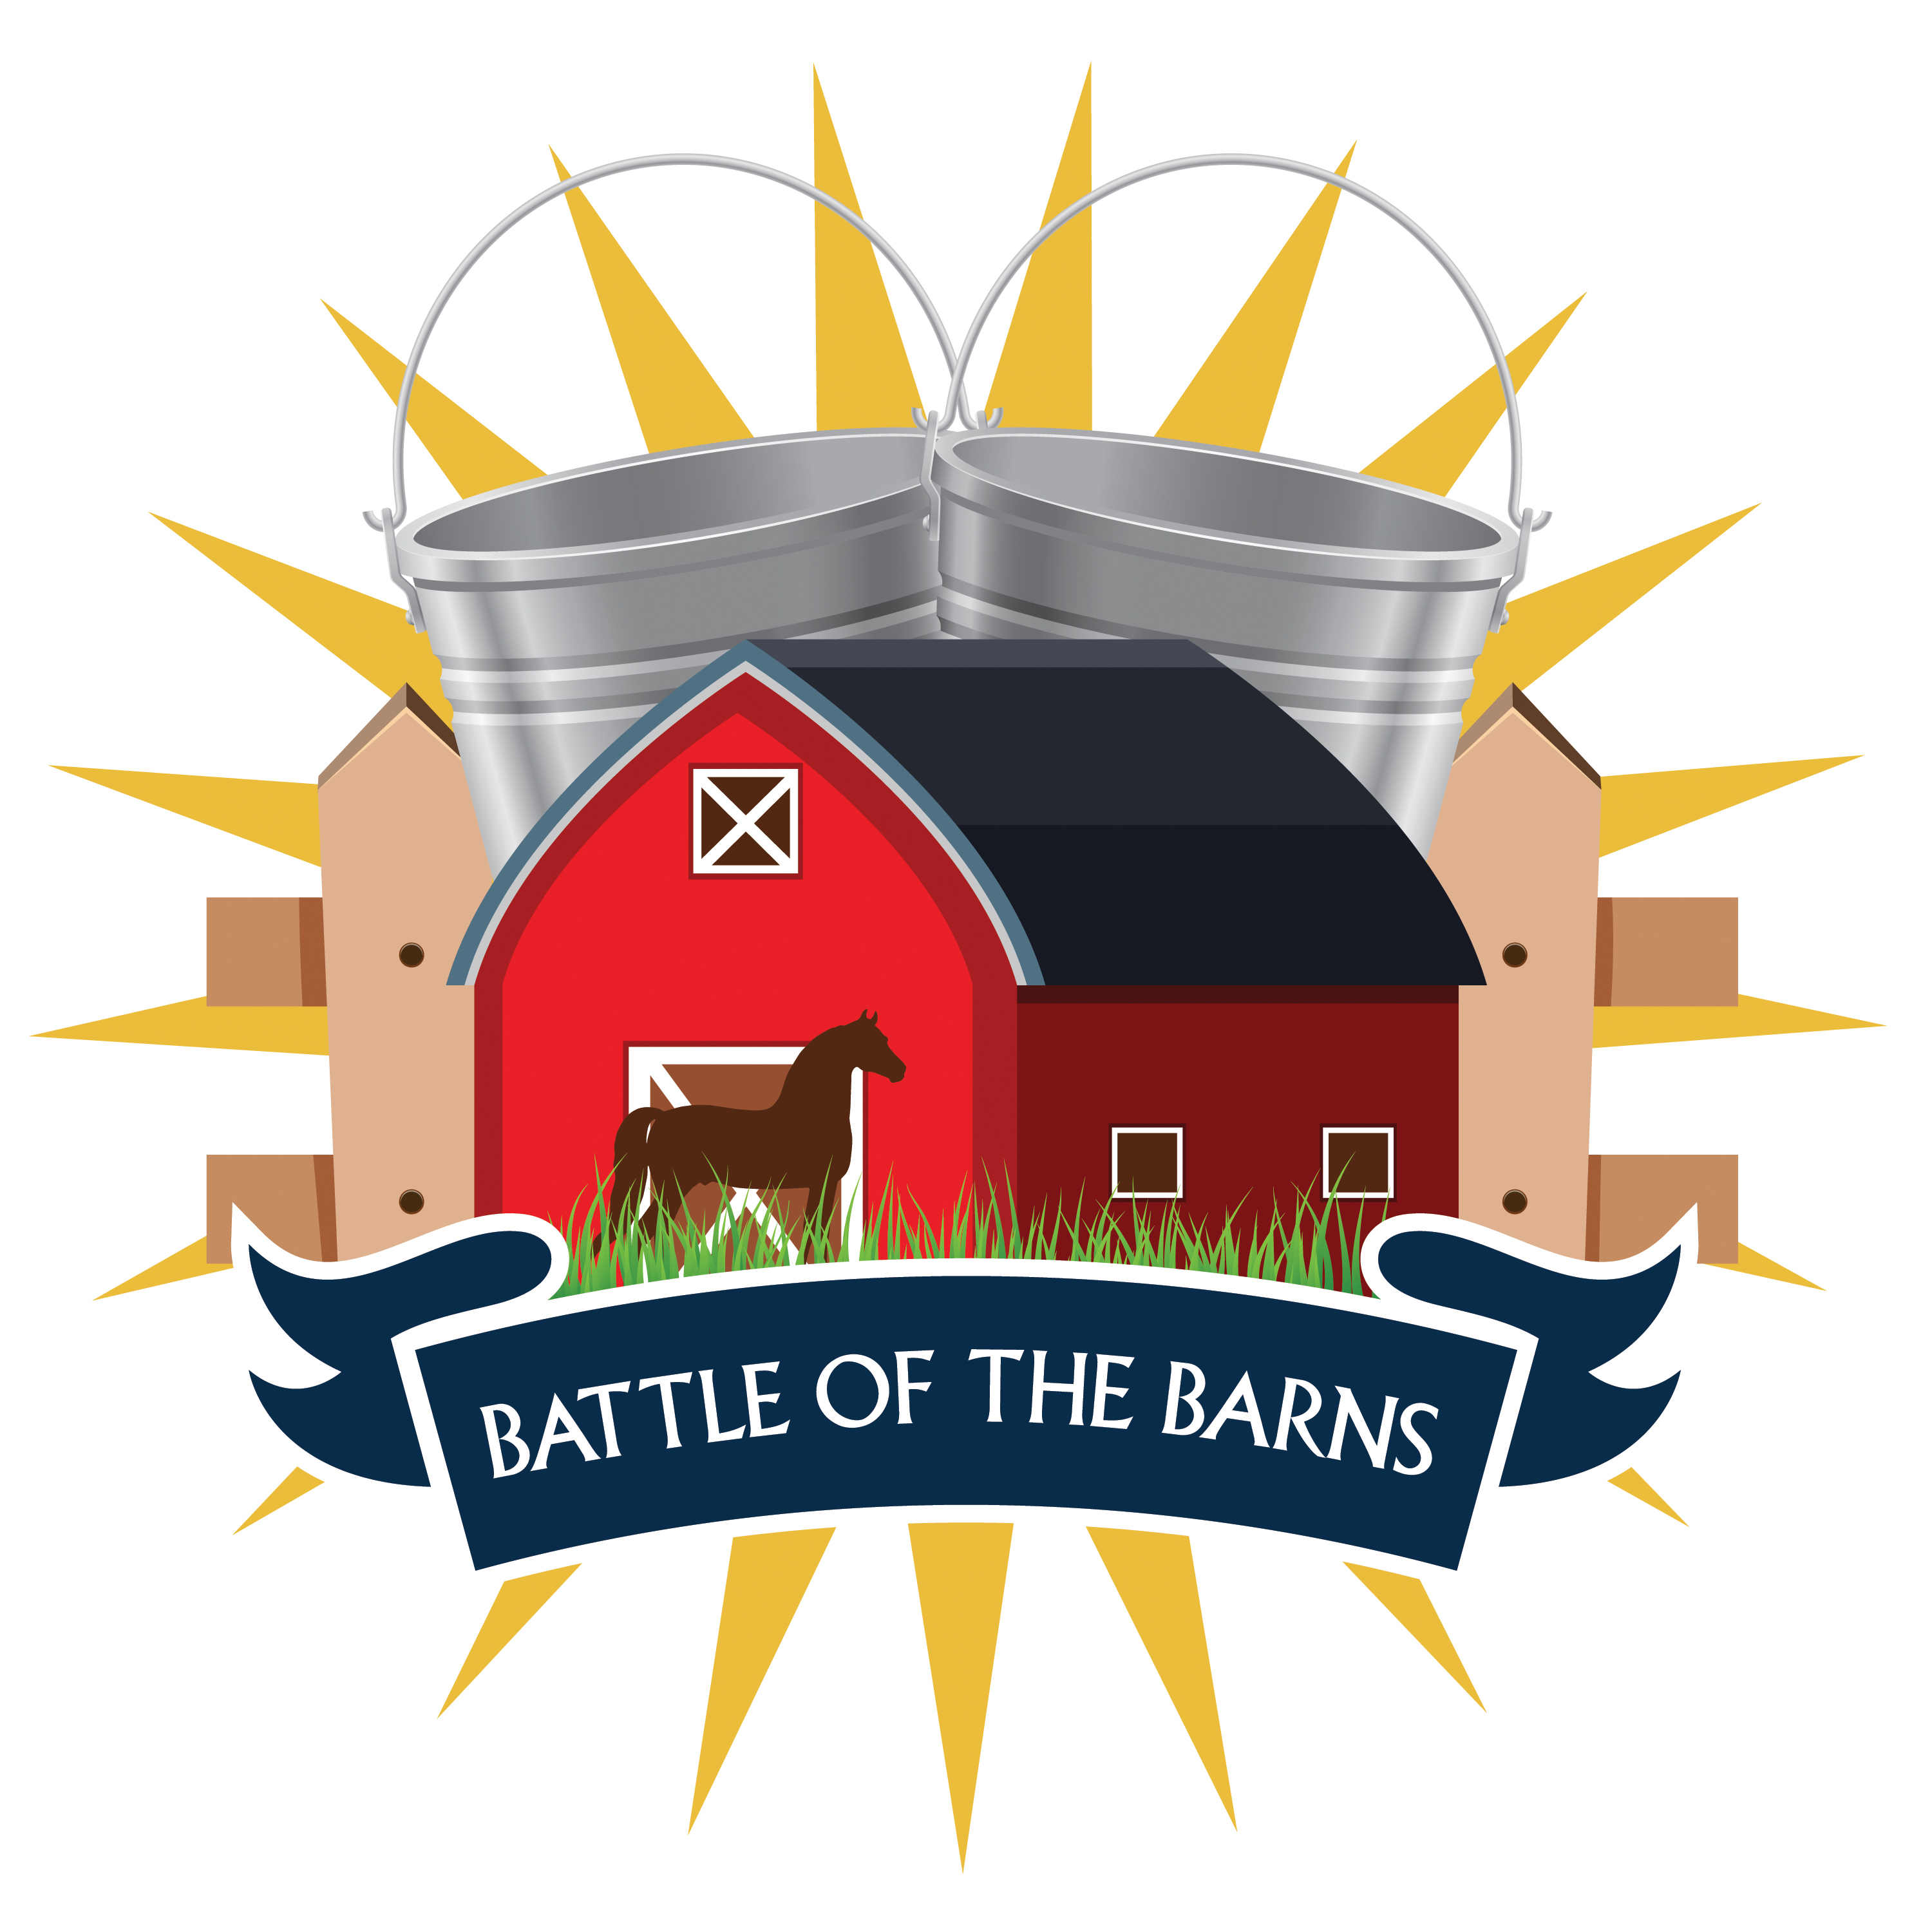 Battle of the Barns